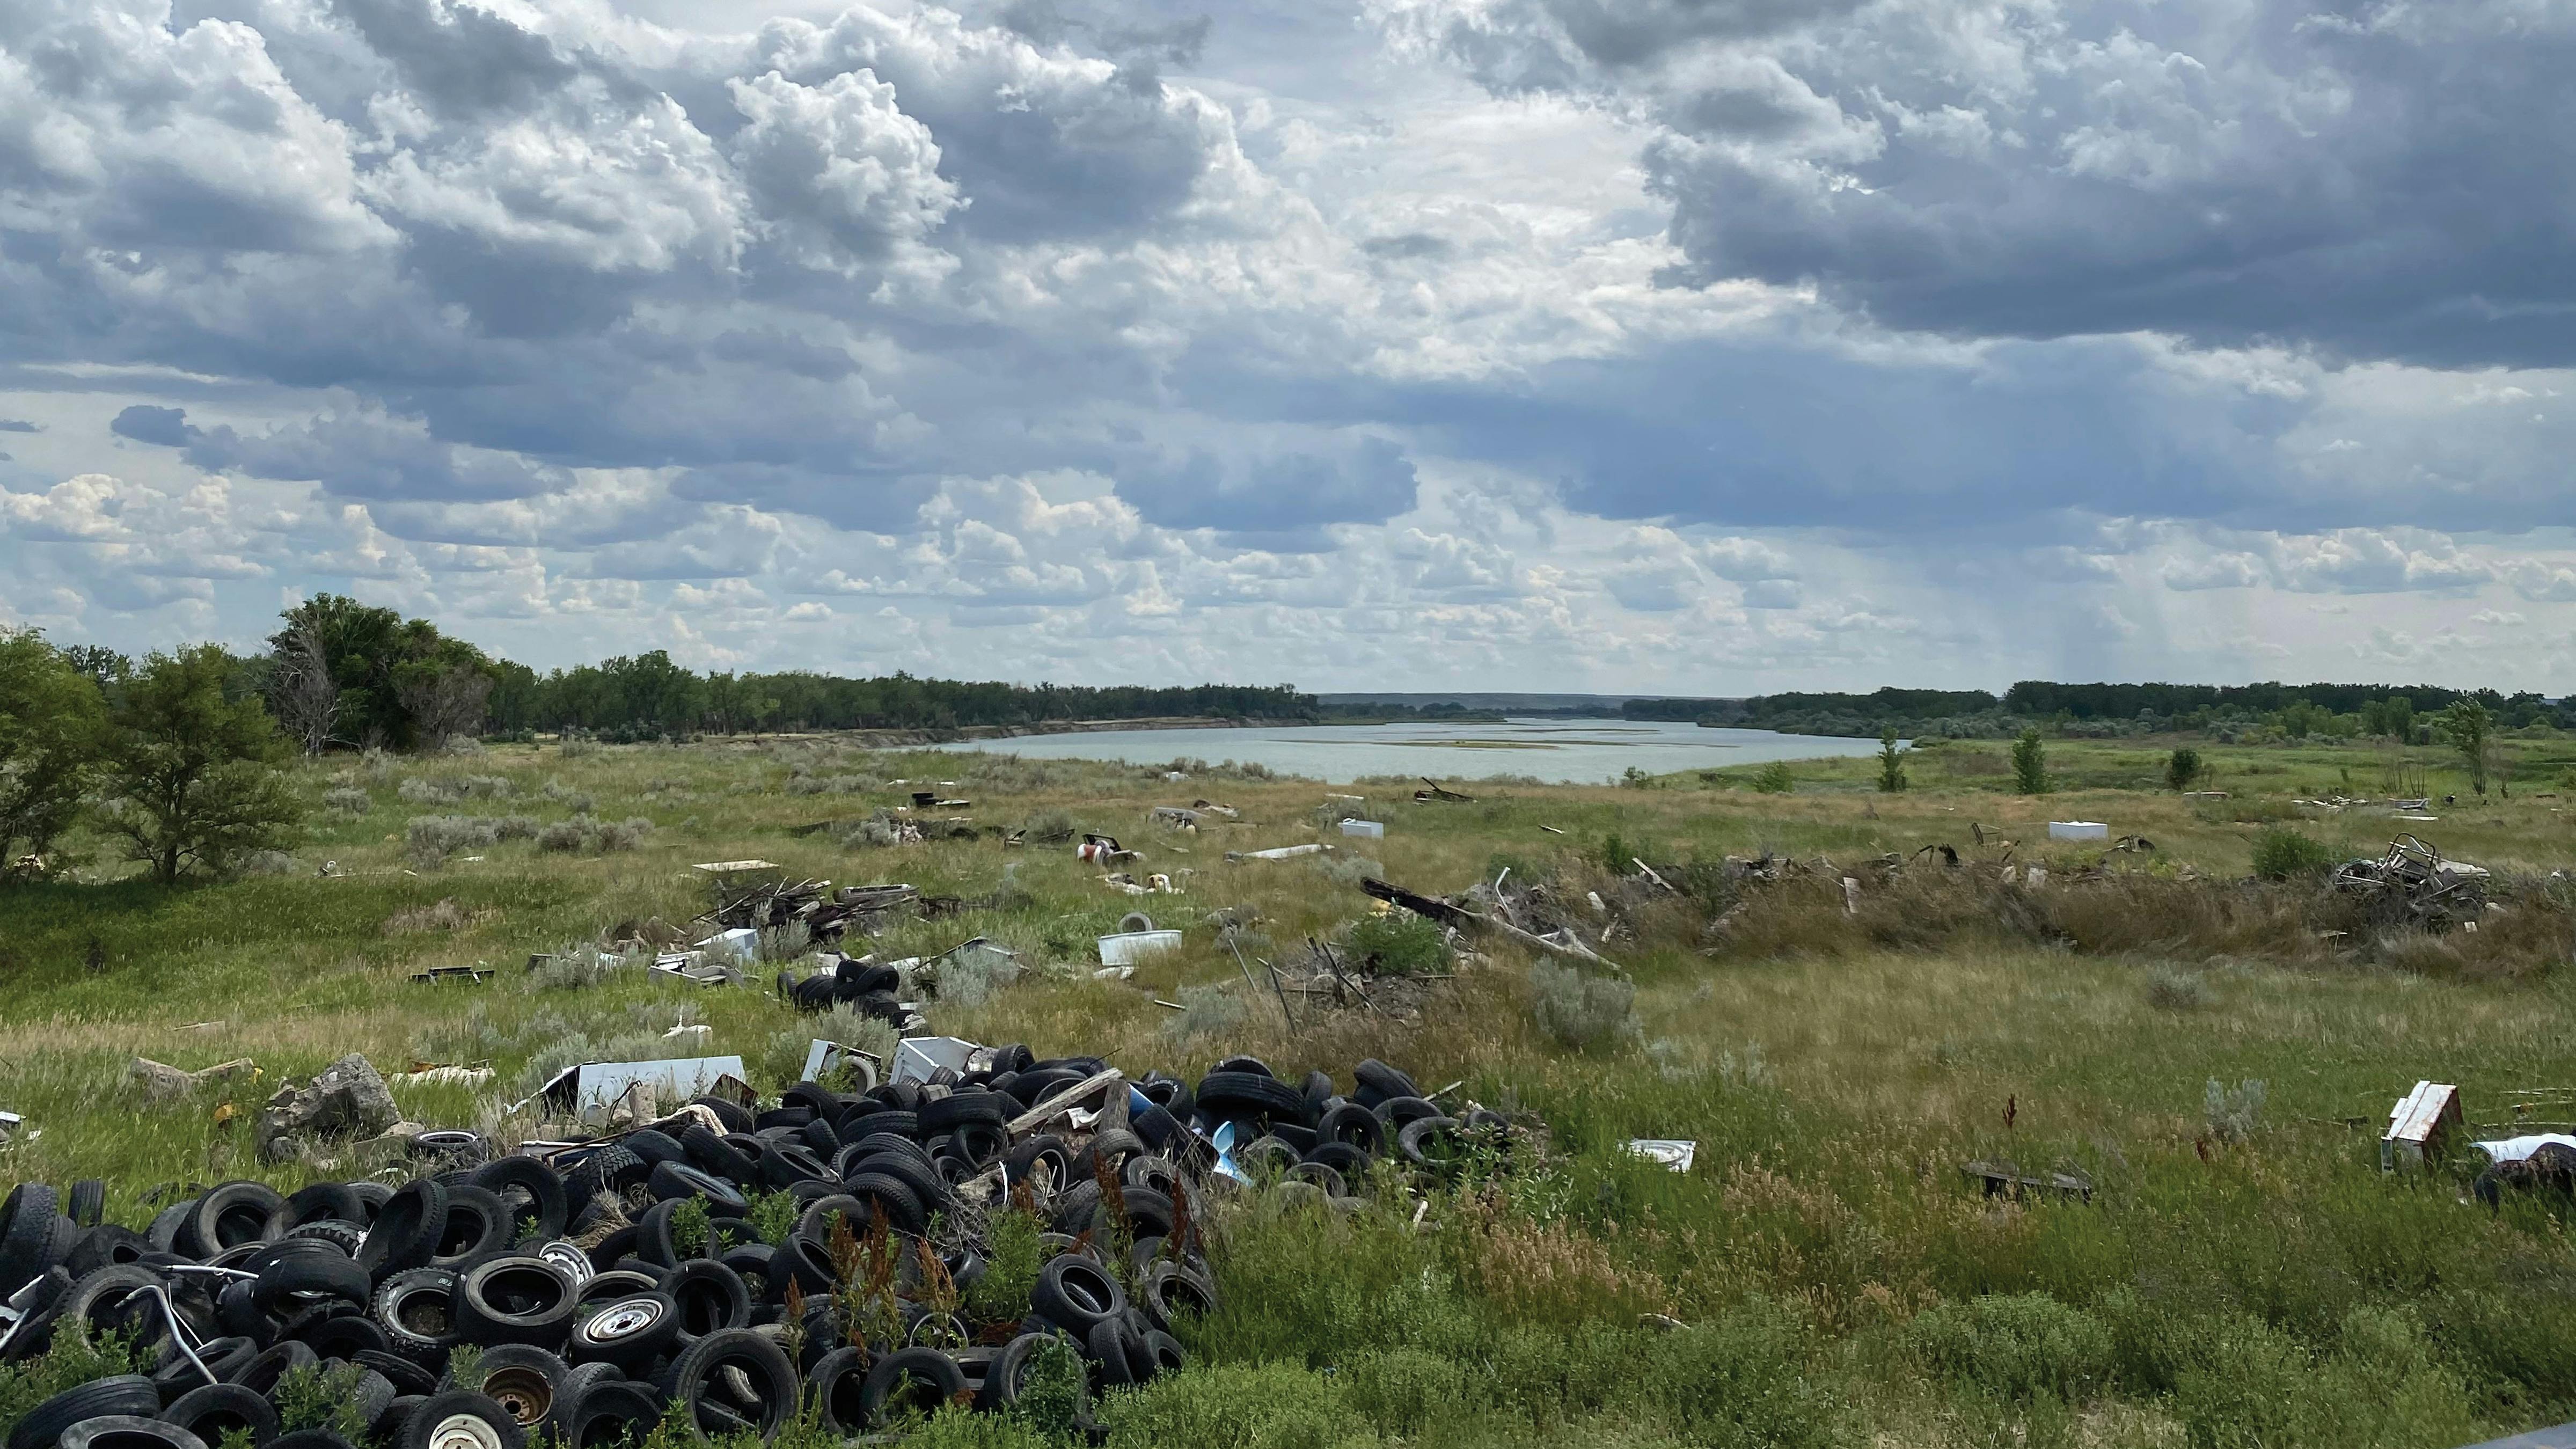 scene of grassy area along river with debris dumping in foreground